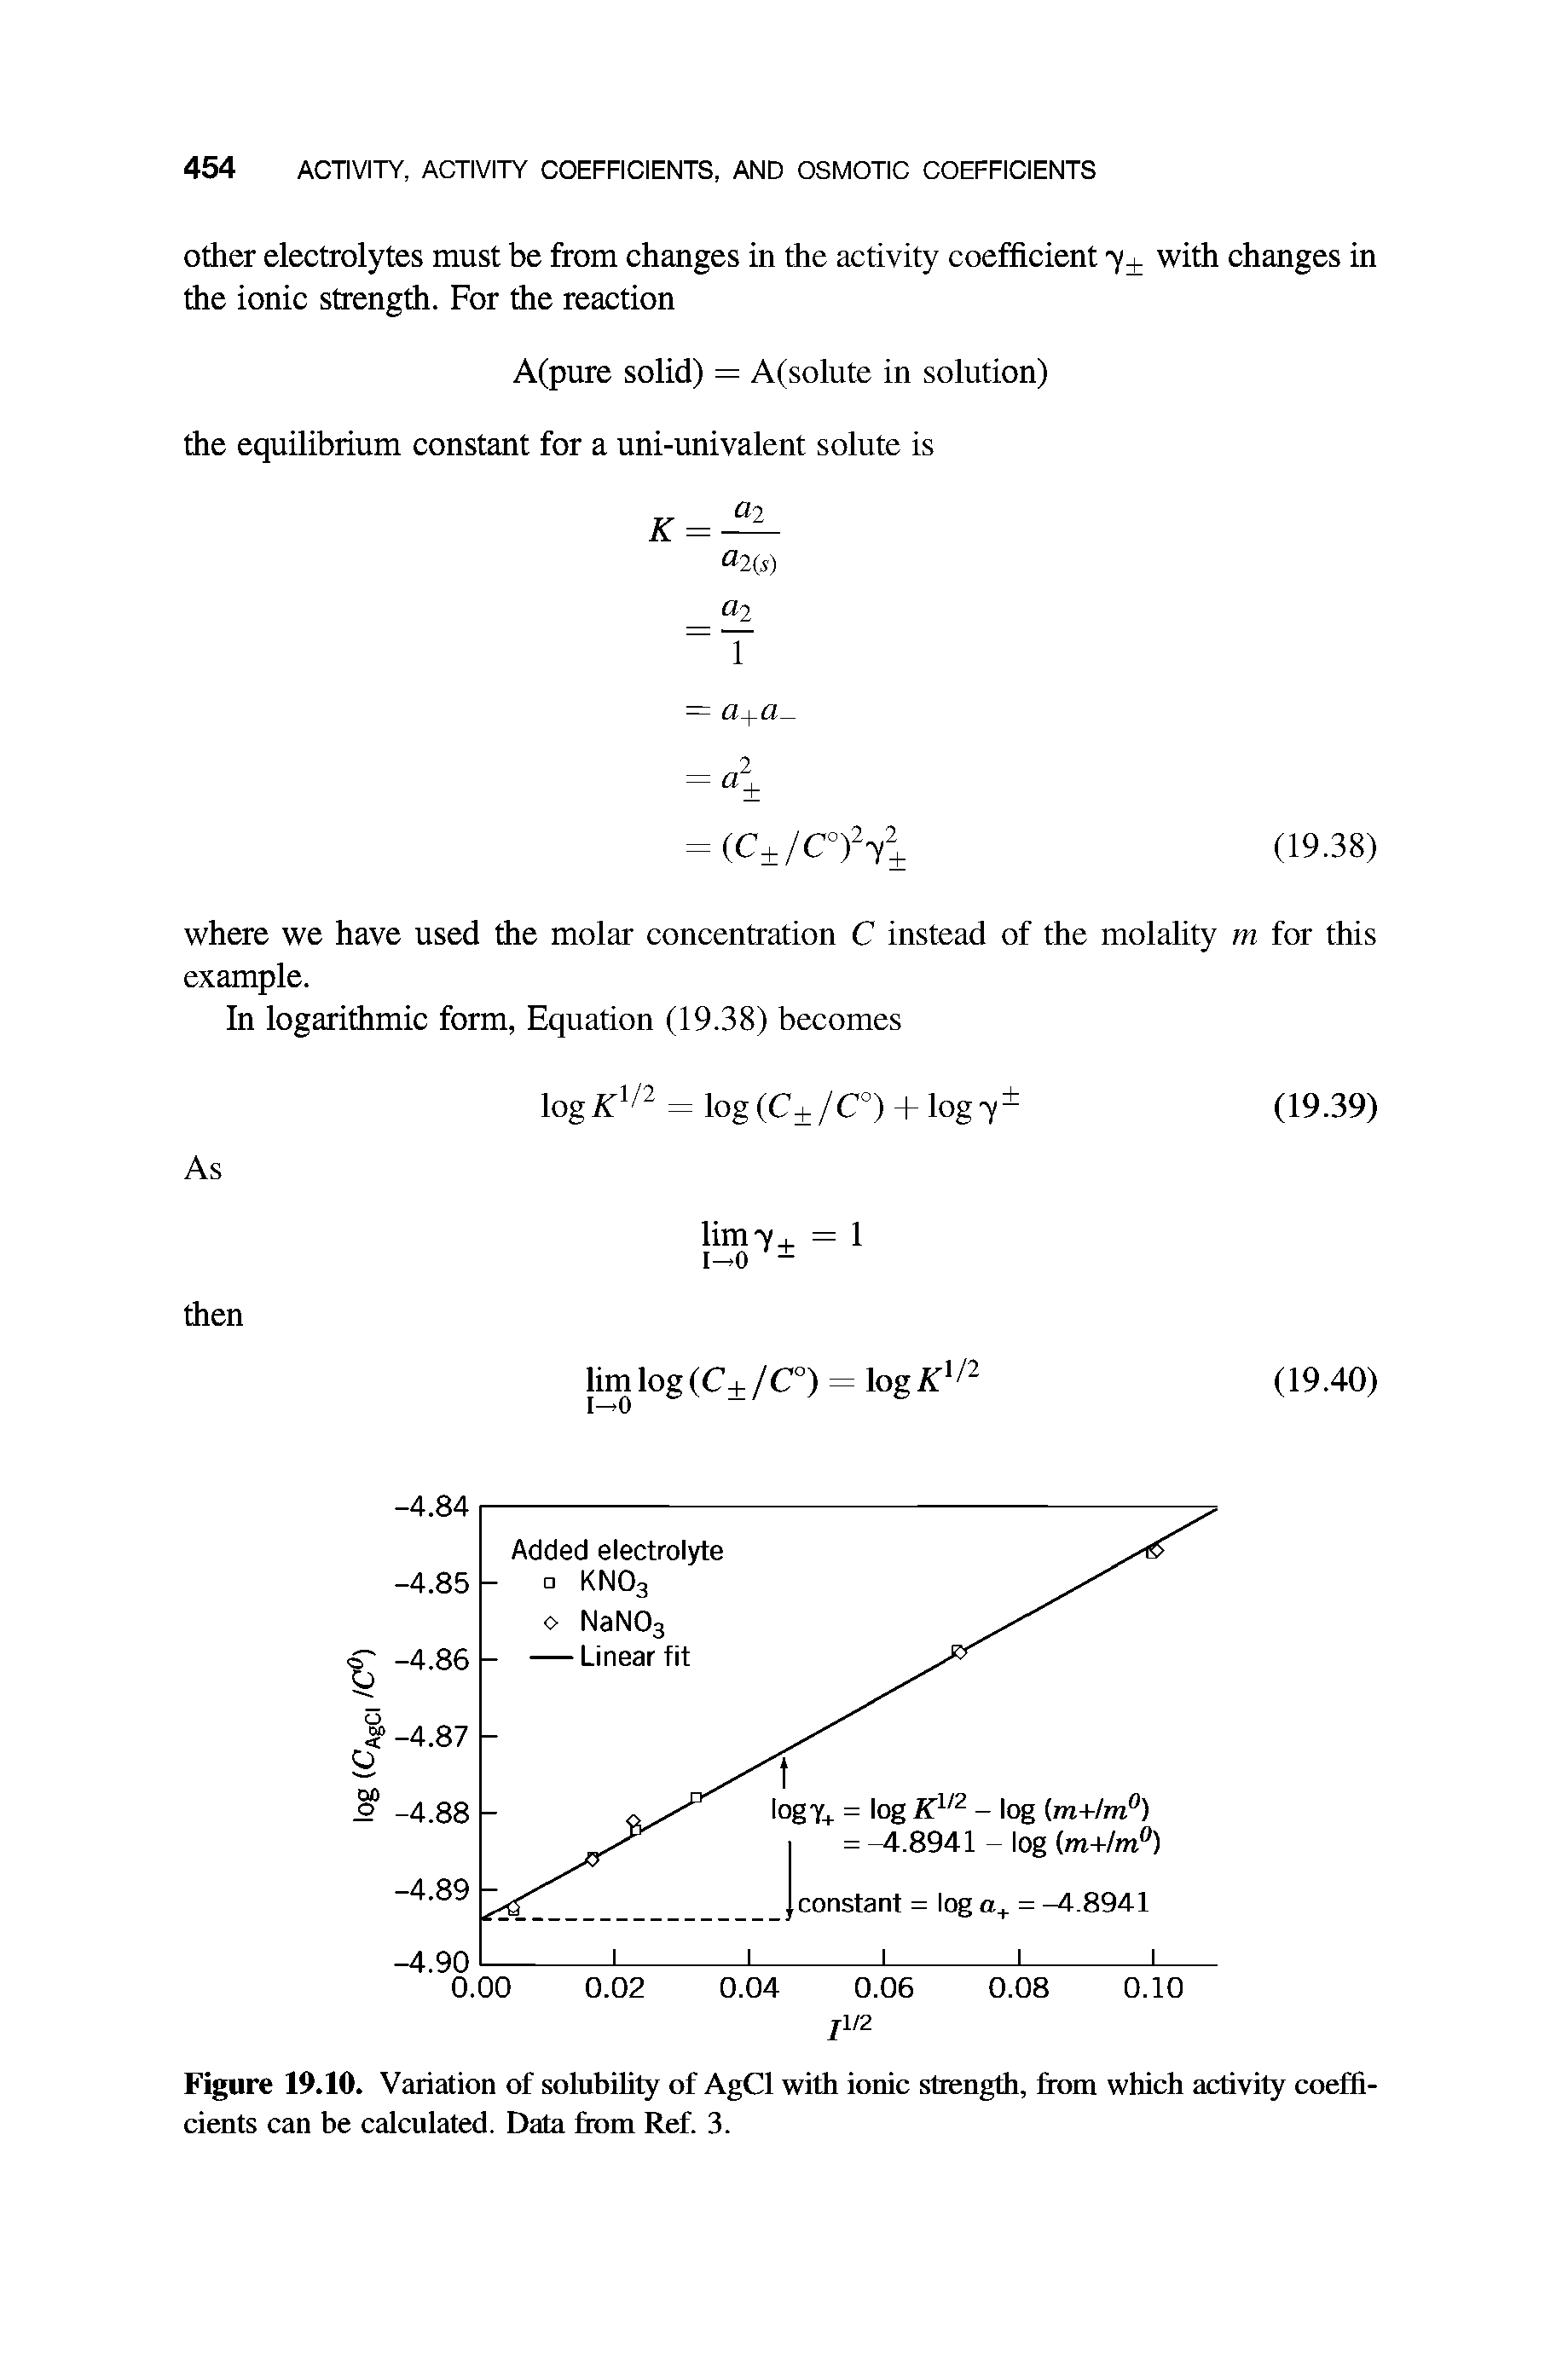 Figure 19.10. Variation of solubility of AgCl with ionic strength, from which activity coefficients can be calculated. Data from Ref. 3.